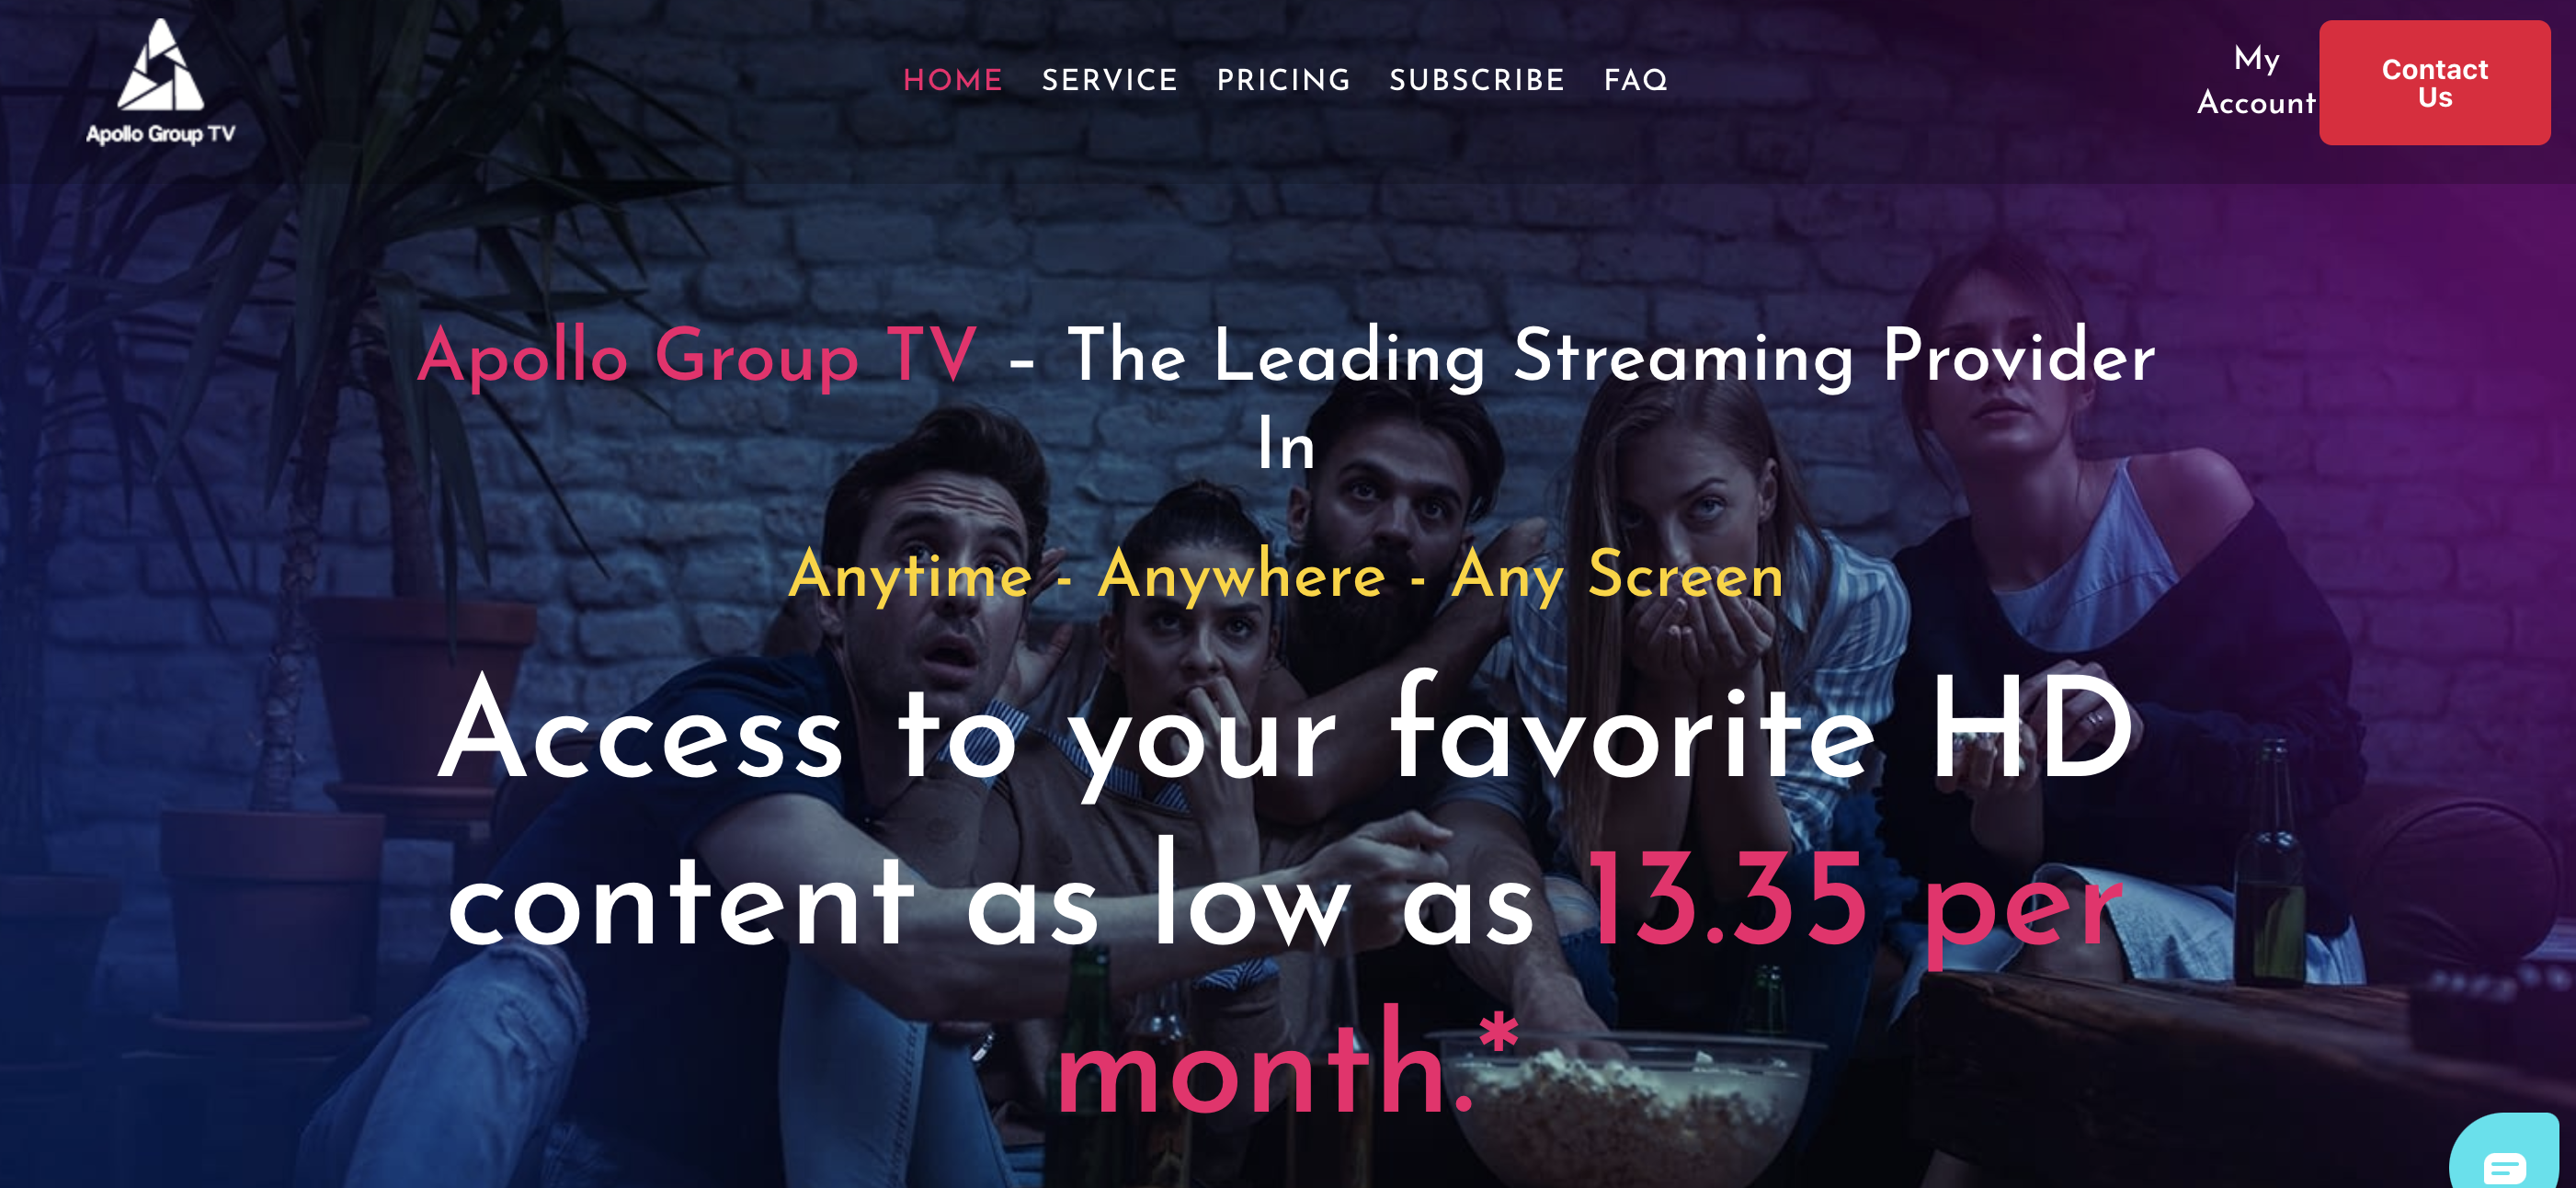 Apollo Group TV is one of the best IPTV services available and is used by thousands of cord-cutters worldwide.